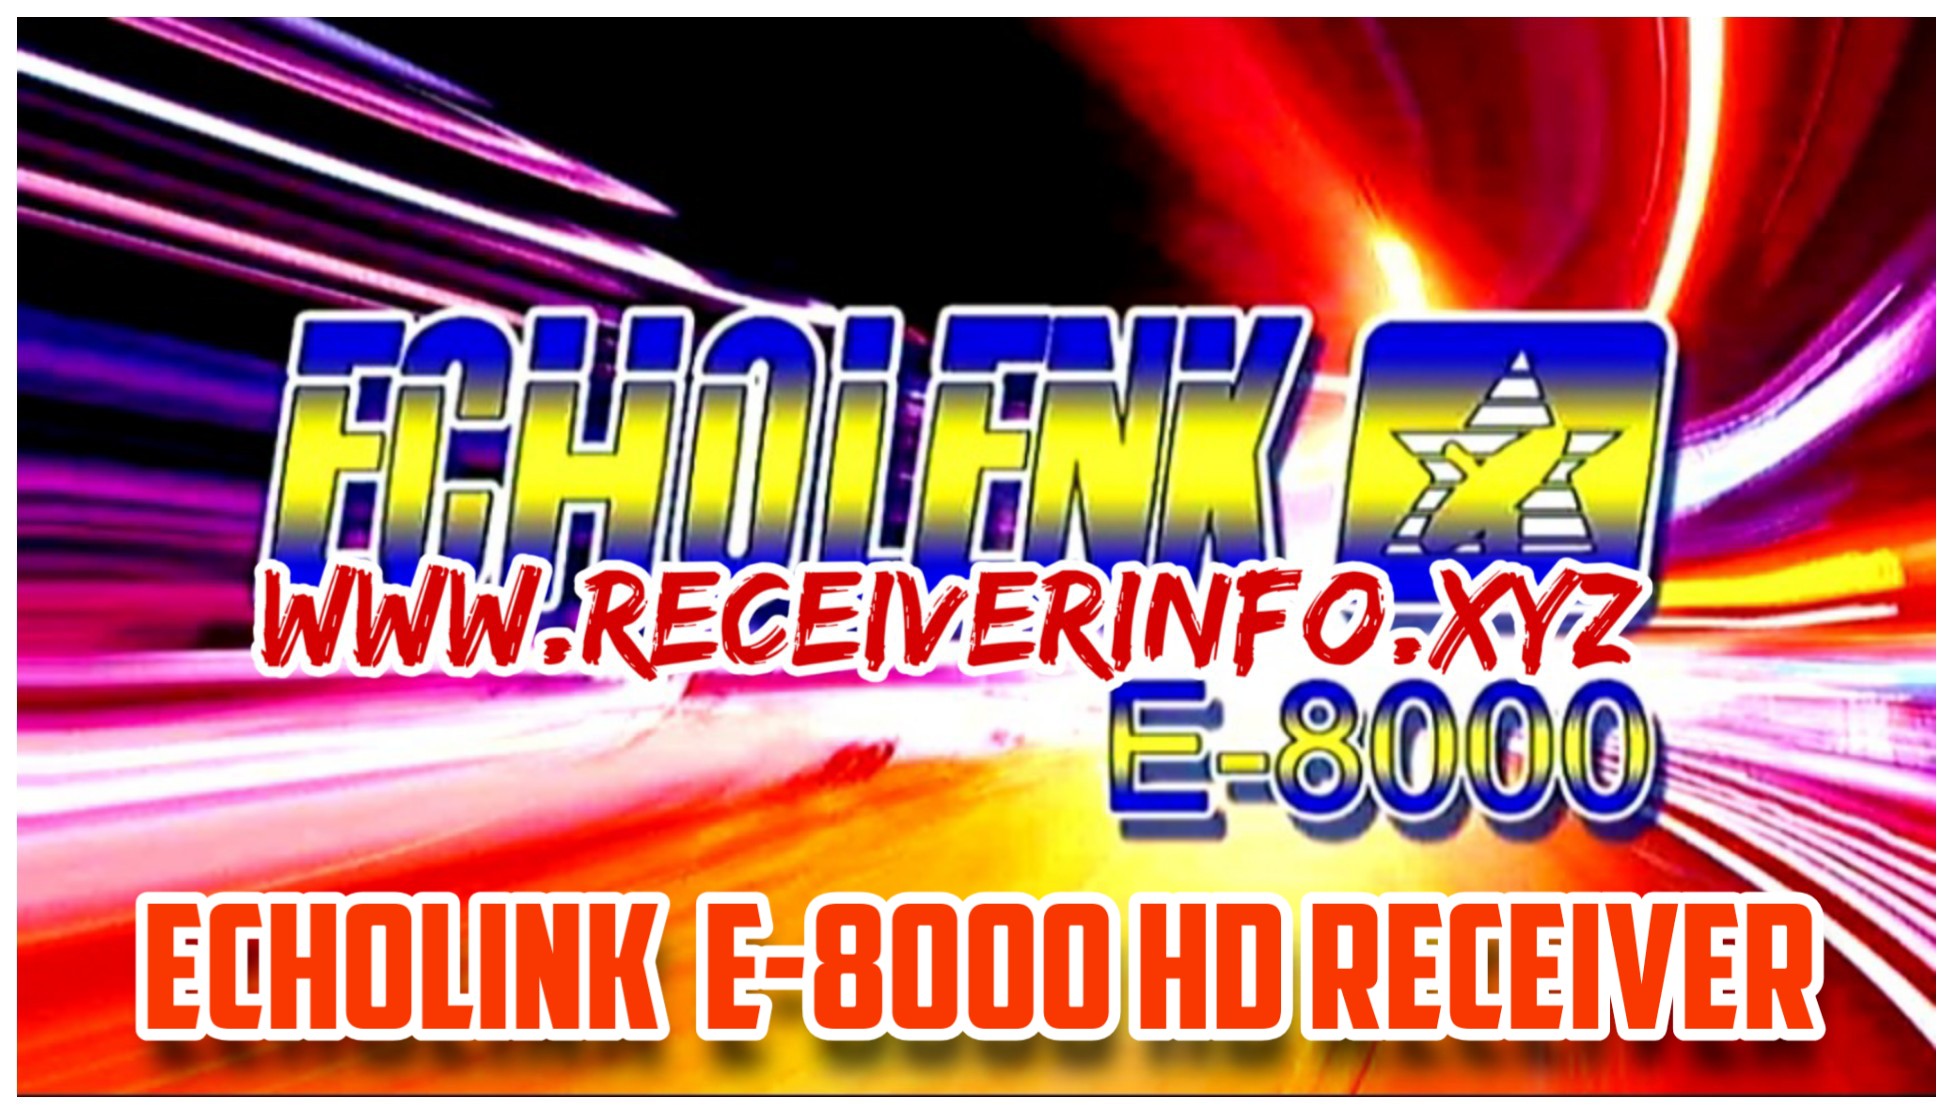 ECHOLINK E-8000 1506T HD RECEIVER NEW SOFTWARE WITH IMEI CHANGE